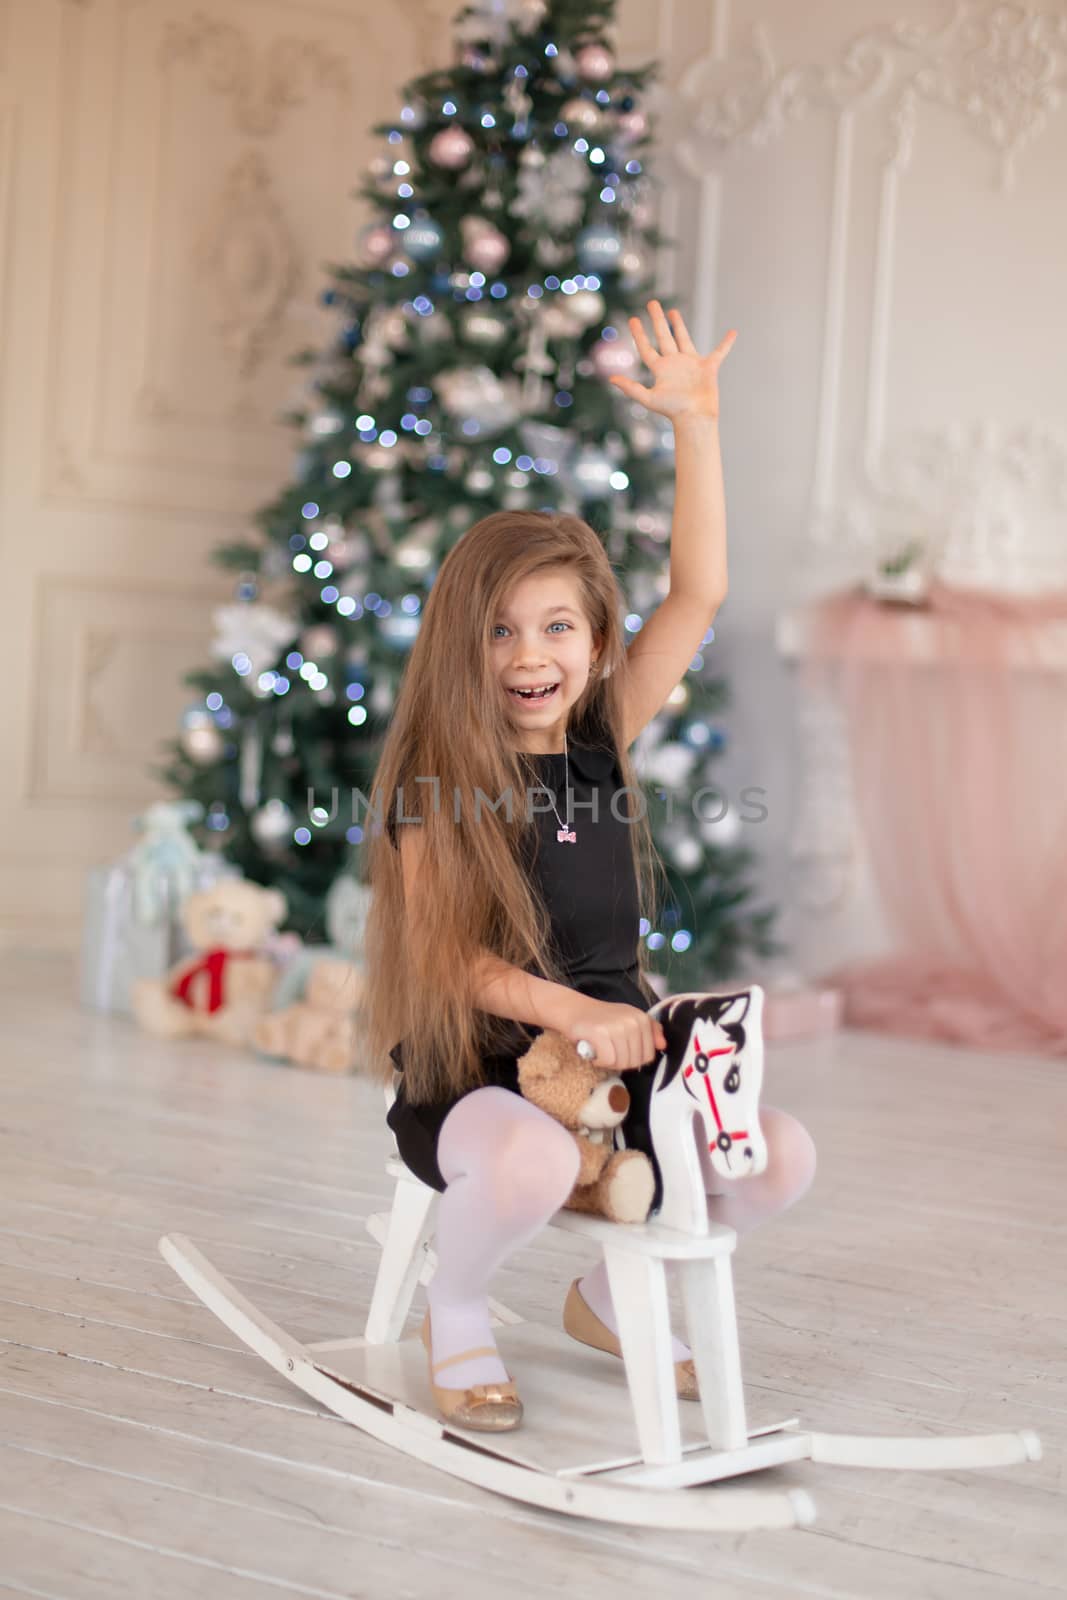 Beautiful little girl rejoices at the wooden rocking horse, a Christmas present from Santa.